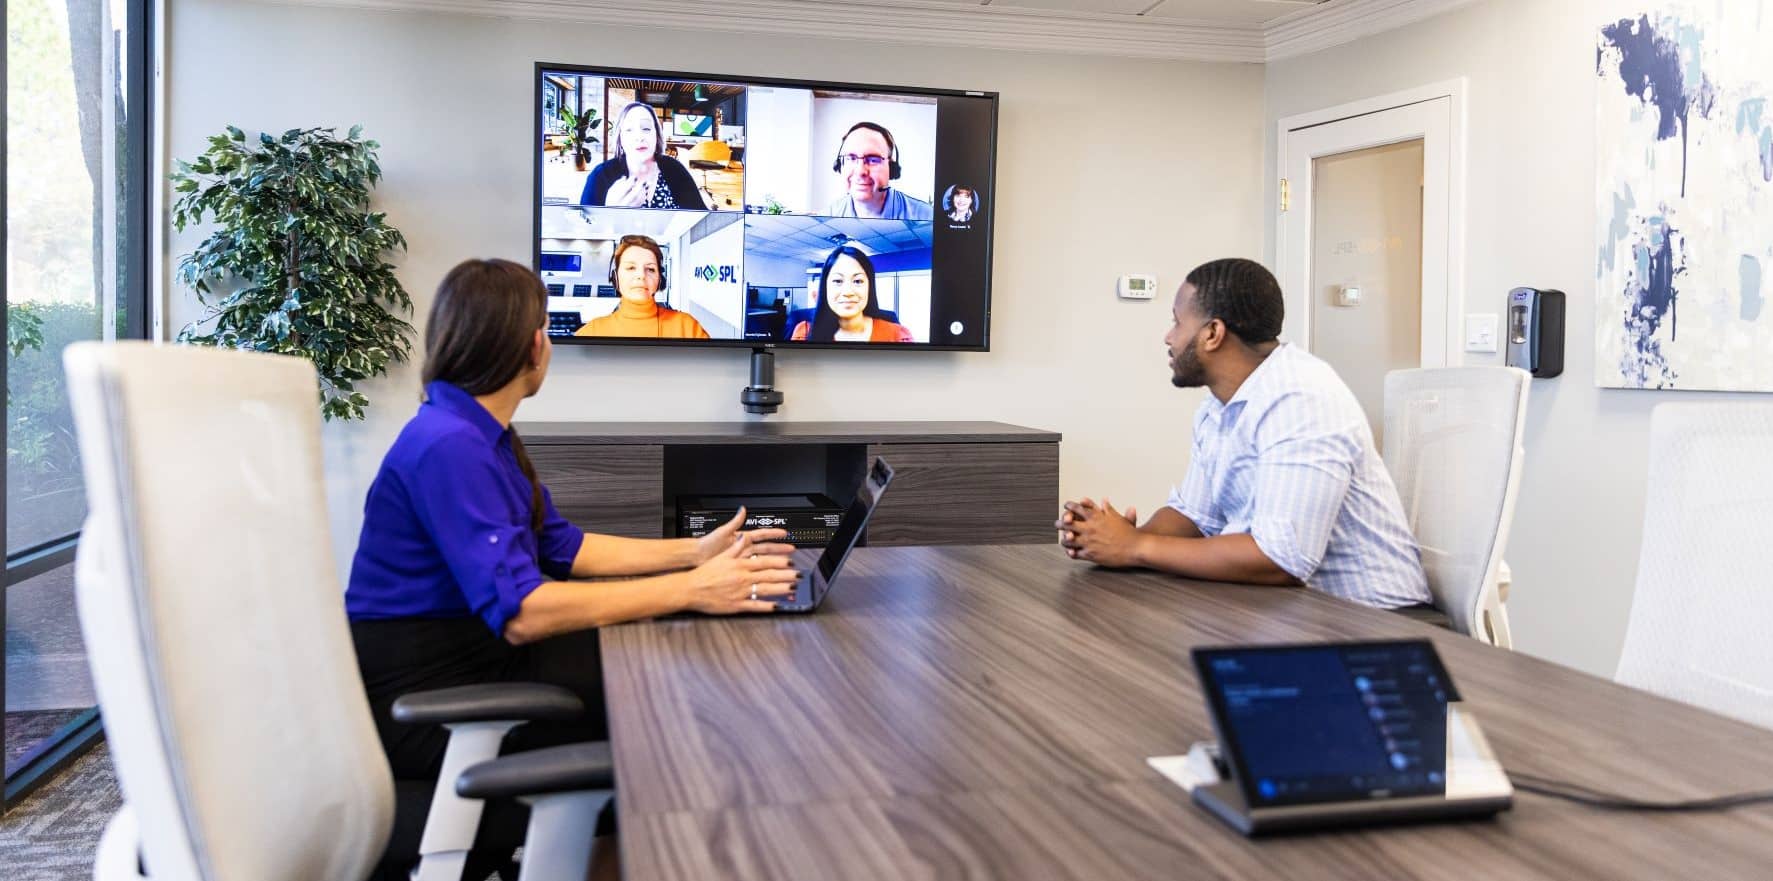 Microsoft teams Hybrid meeting with human experience